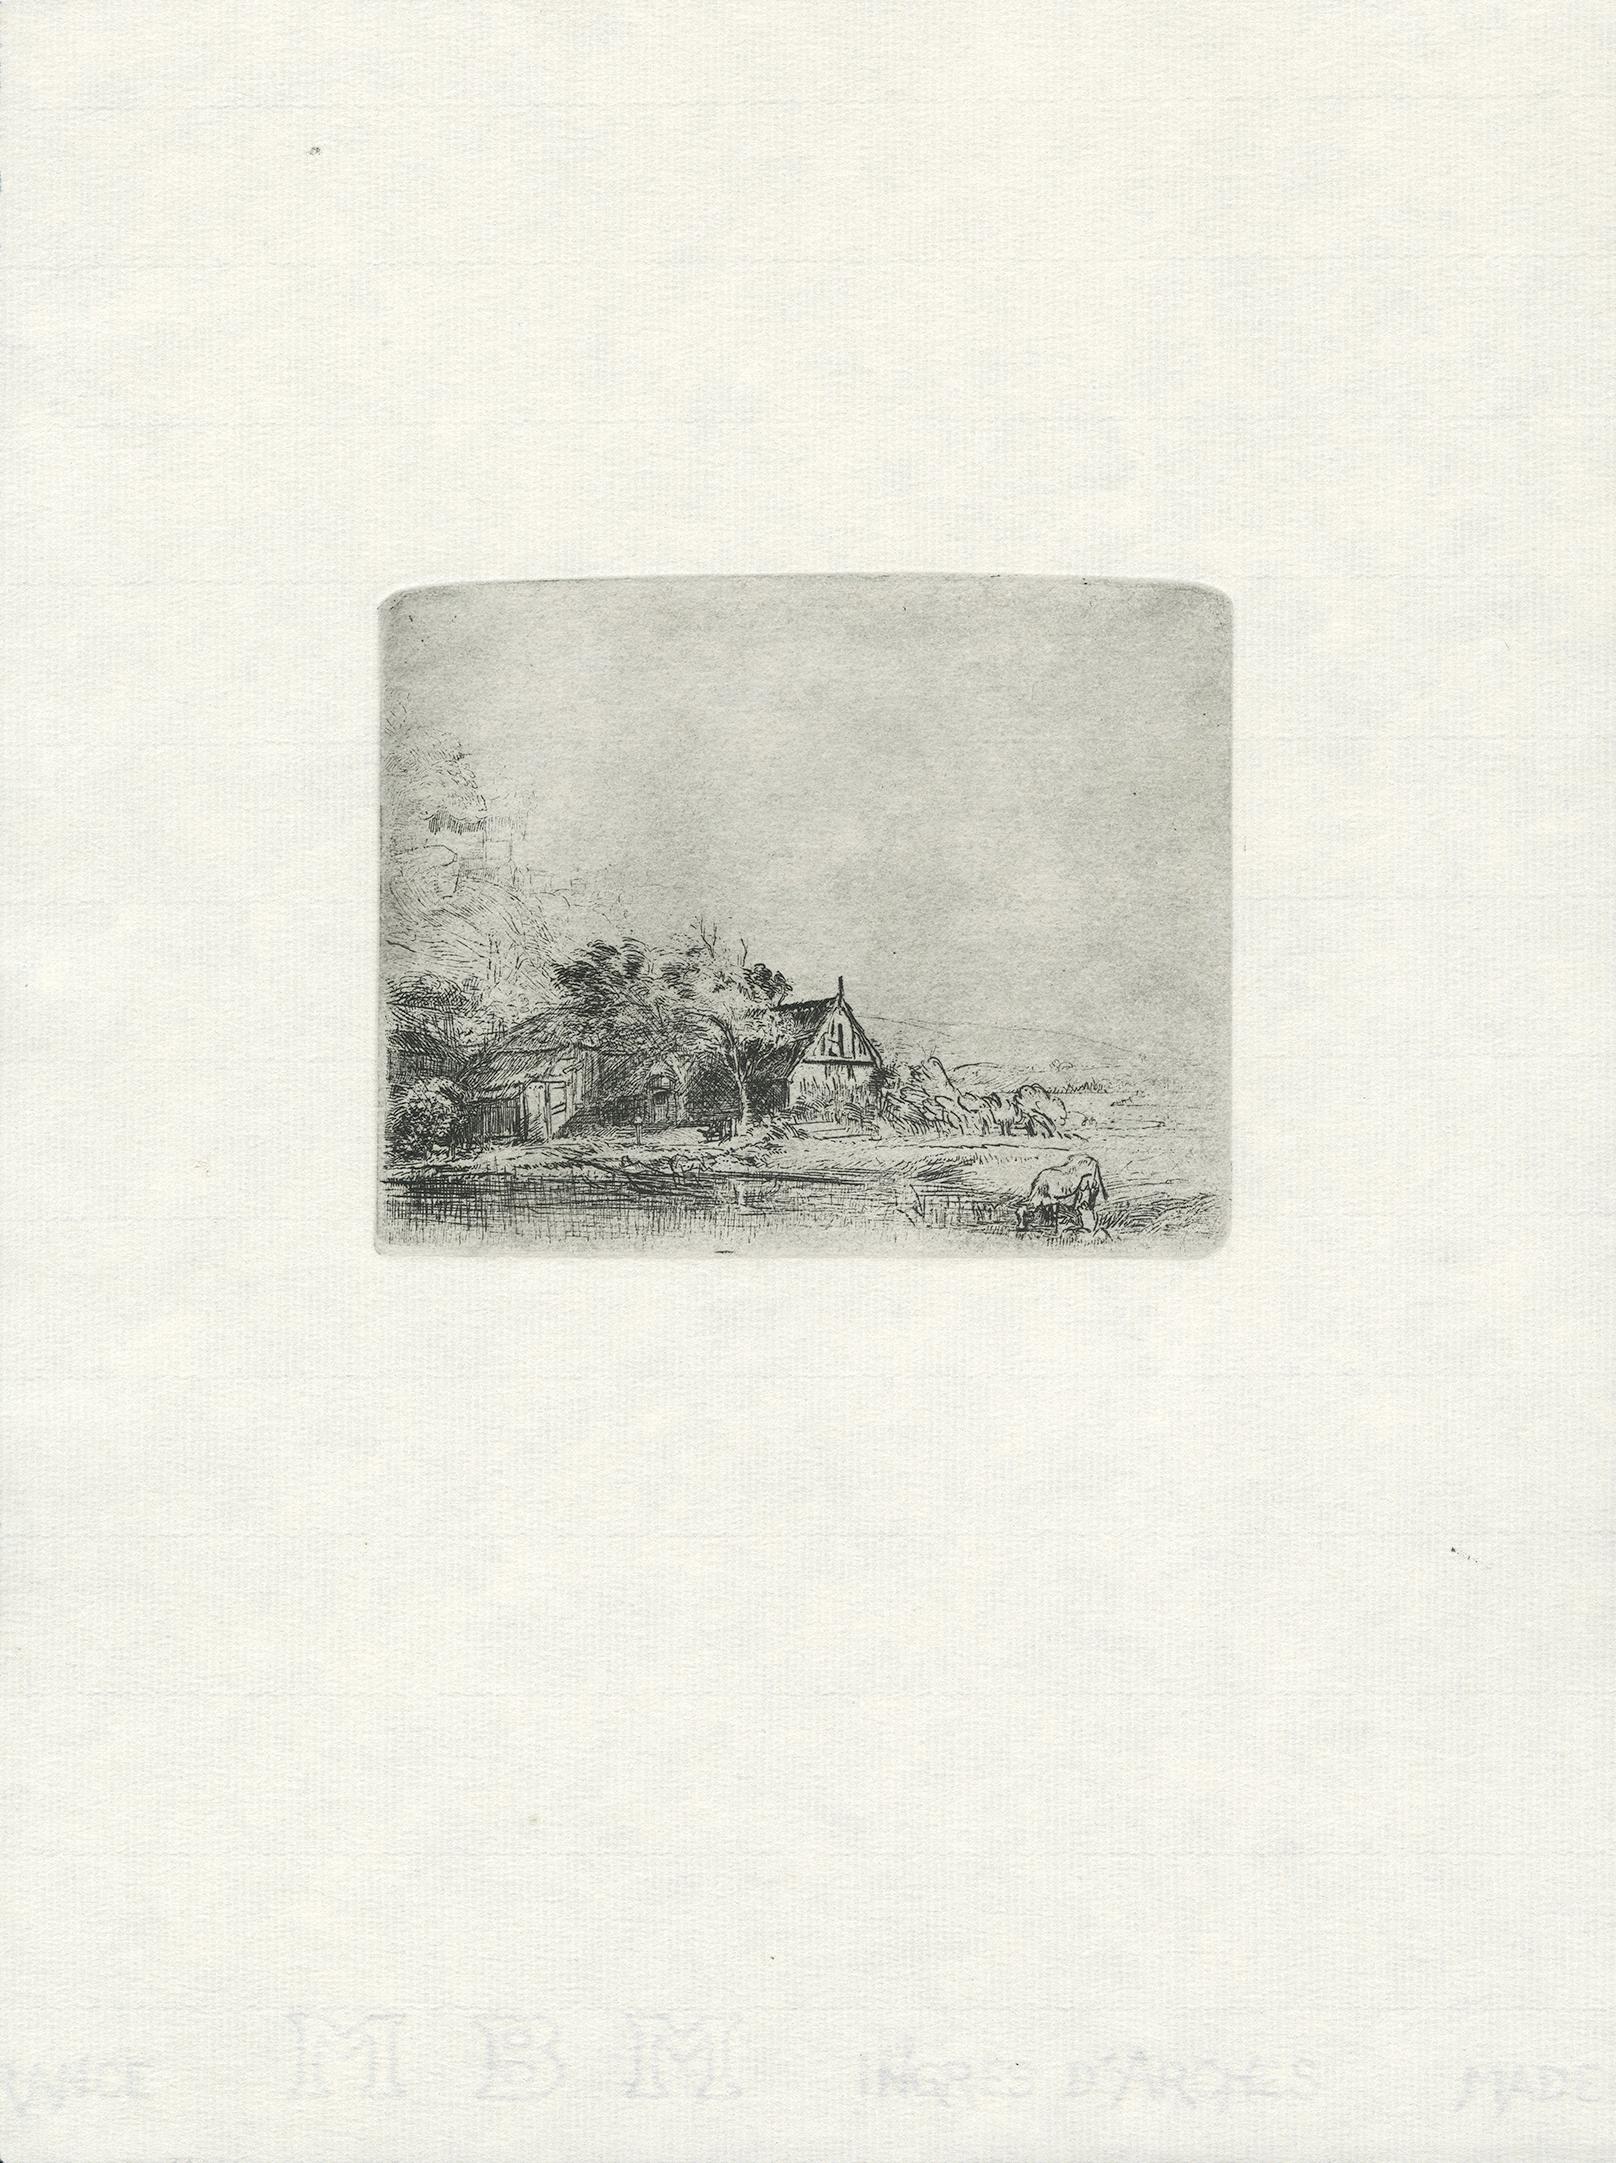 Offered here is a complete set of eight impressions from Rembrandt's original copper plates from the Millennium Edition. After Remprandt passed in 1669, most of his surviving etching plates remained in a single collection until, in 1993, when they